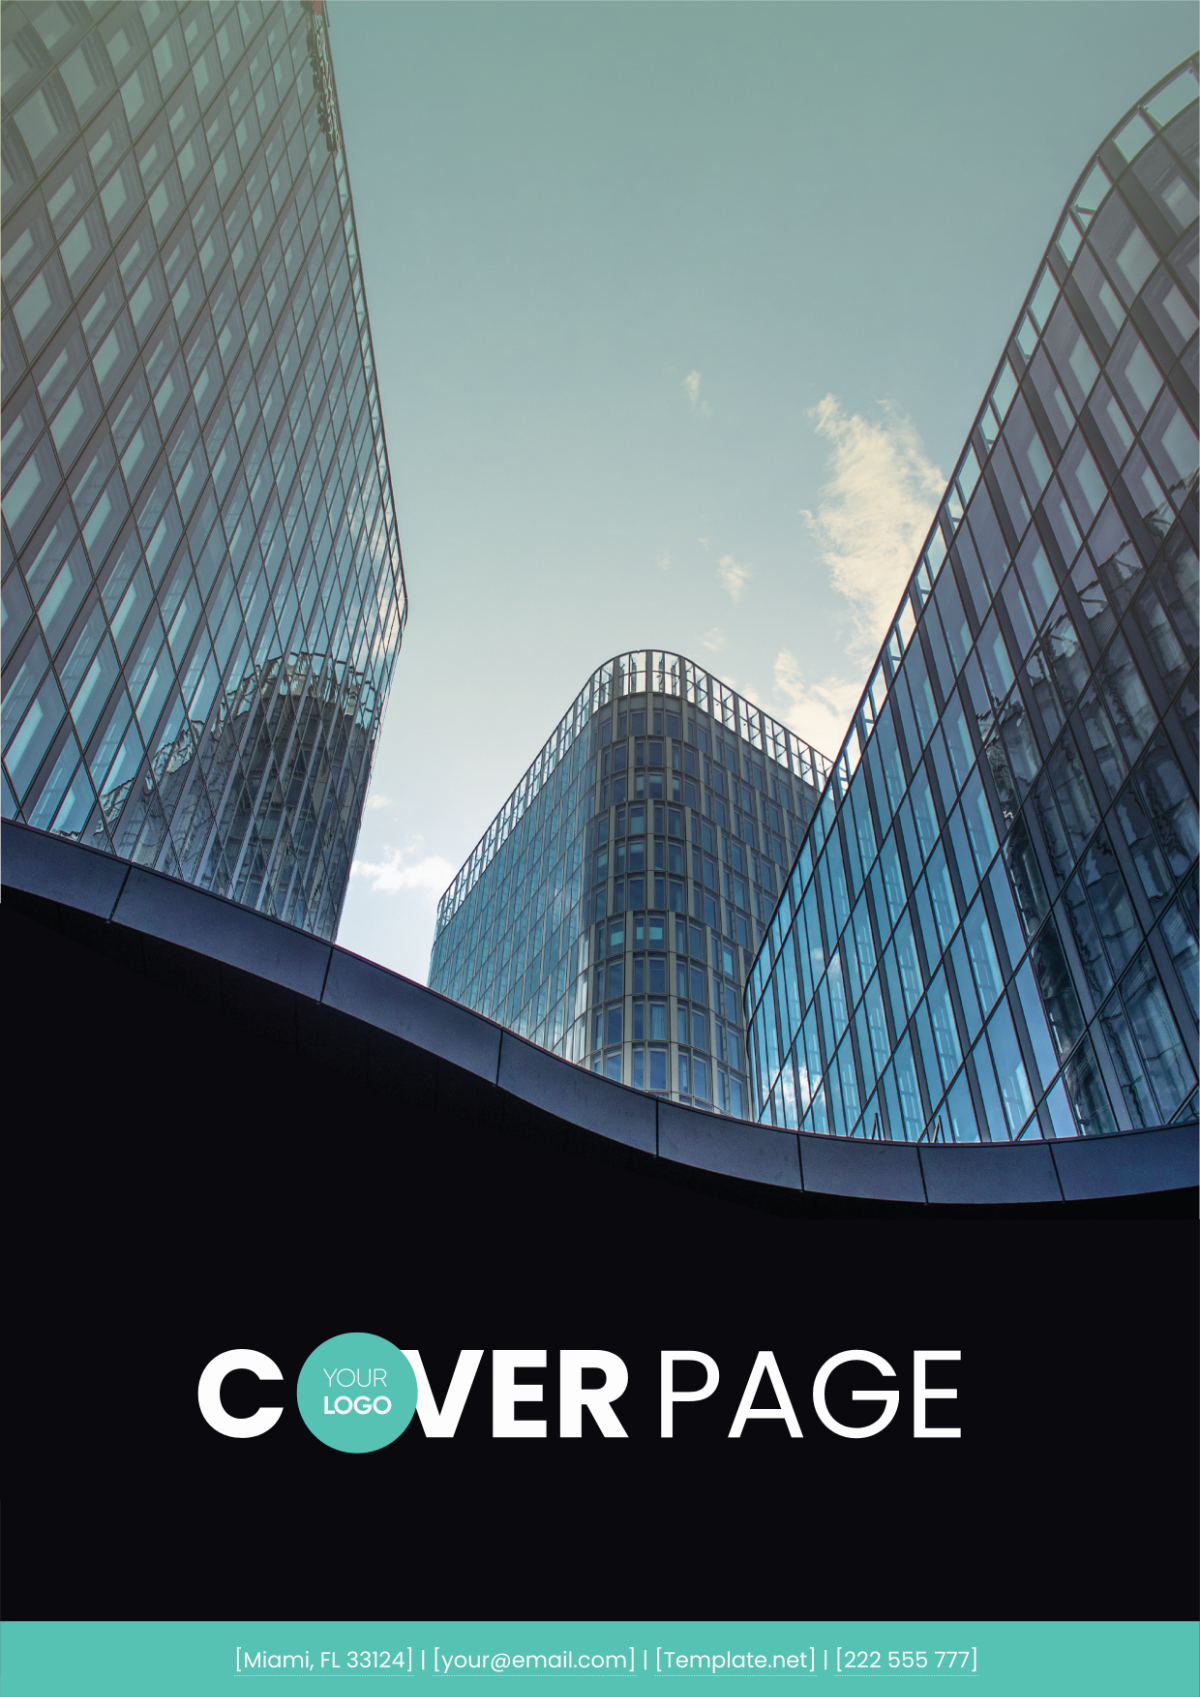 Cover Page Image Template